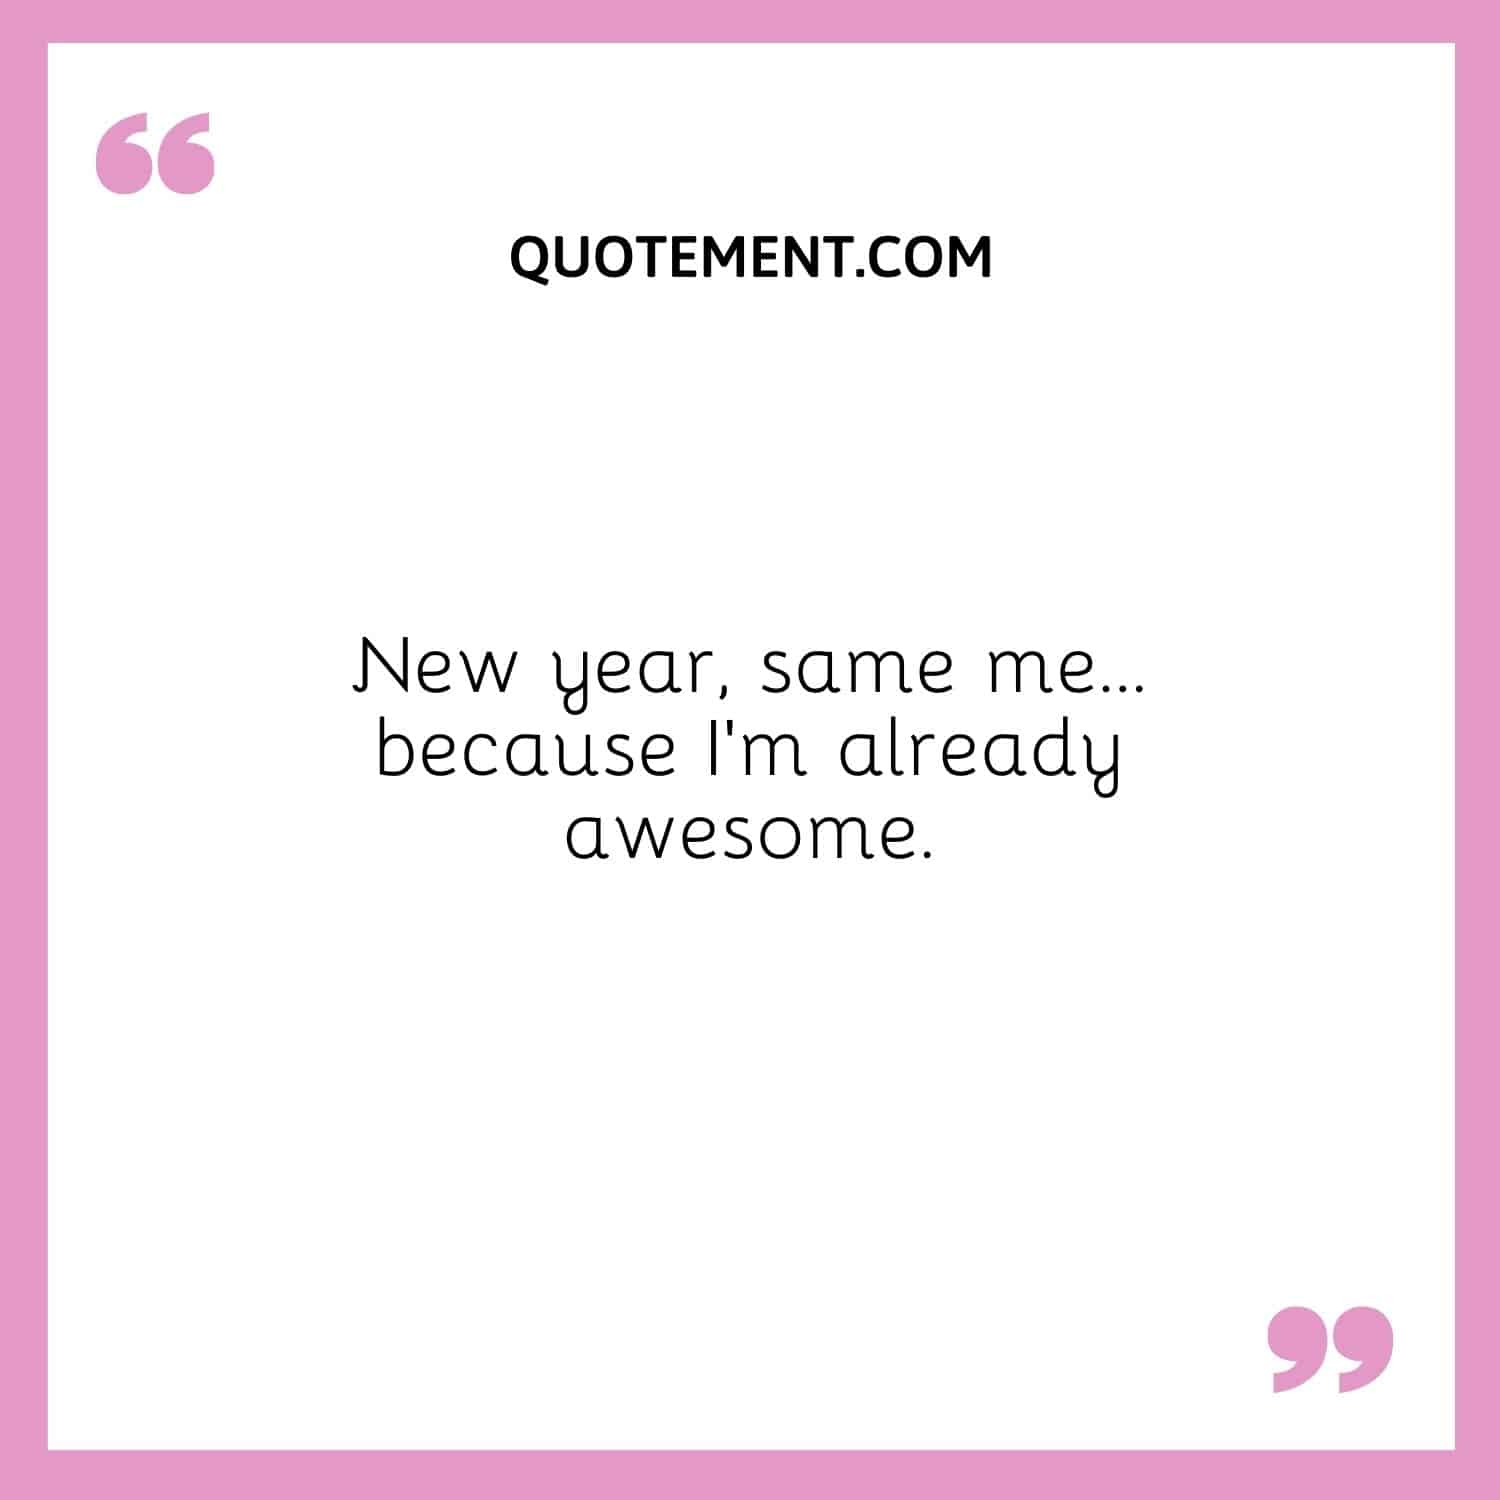 New year, same me... because I'm already awesome.